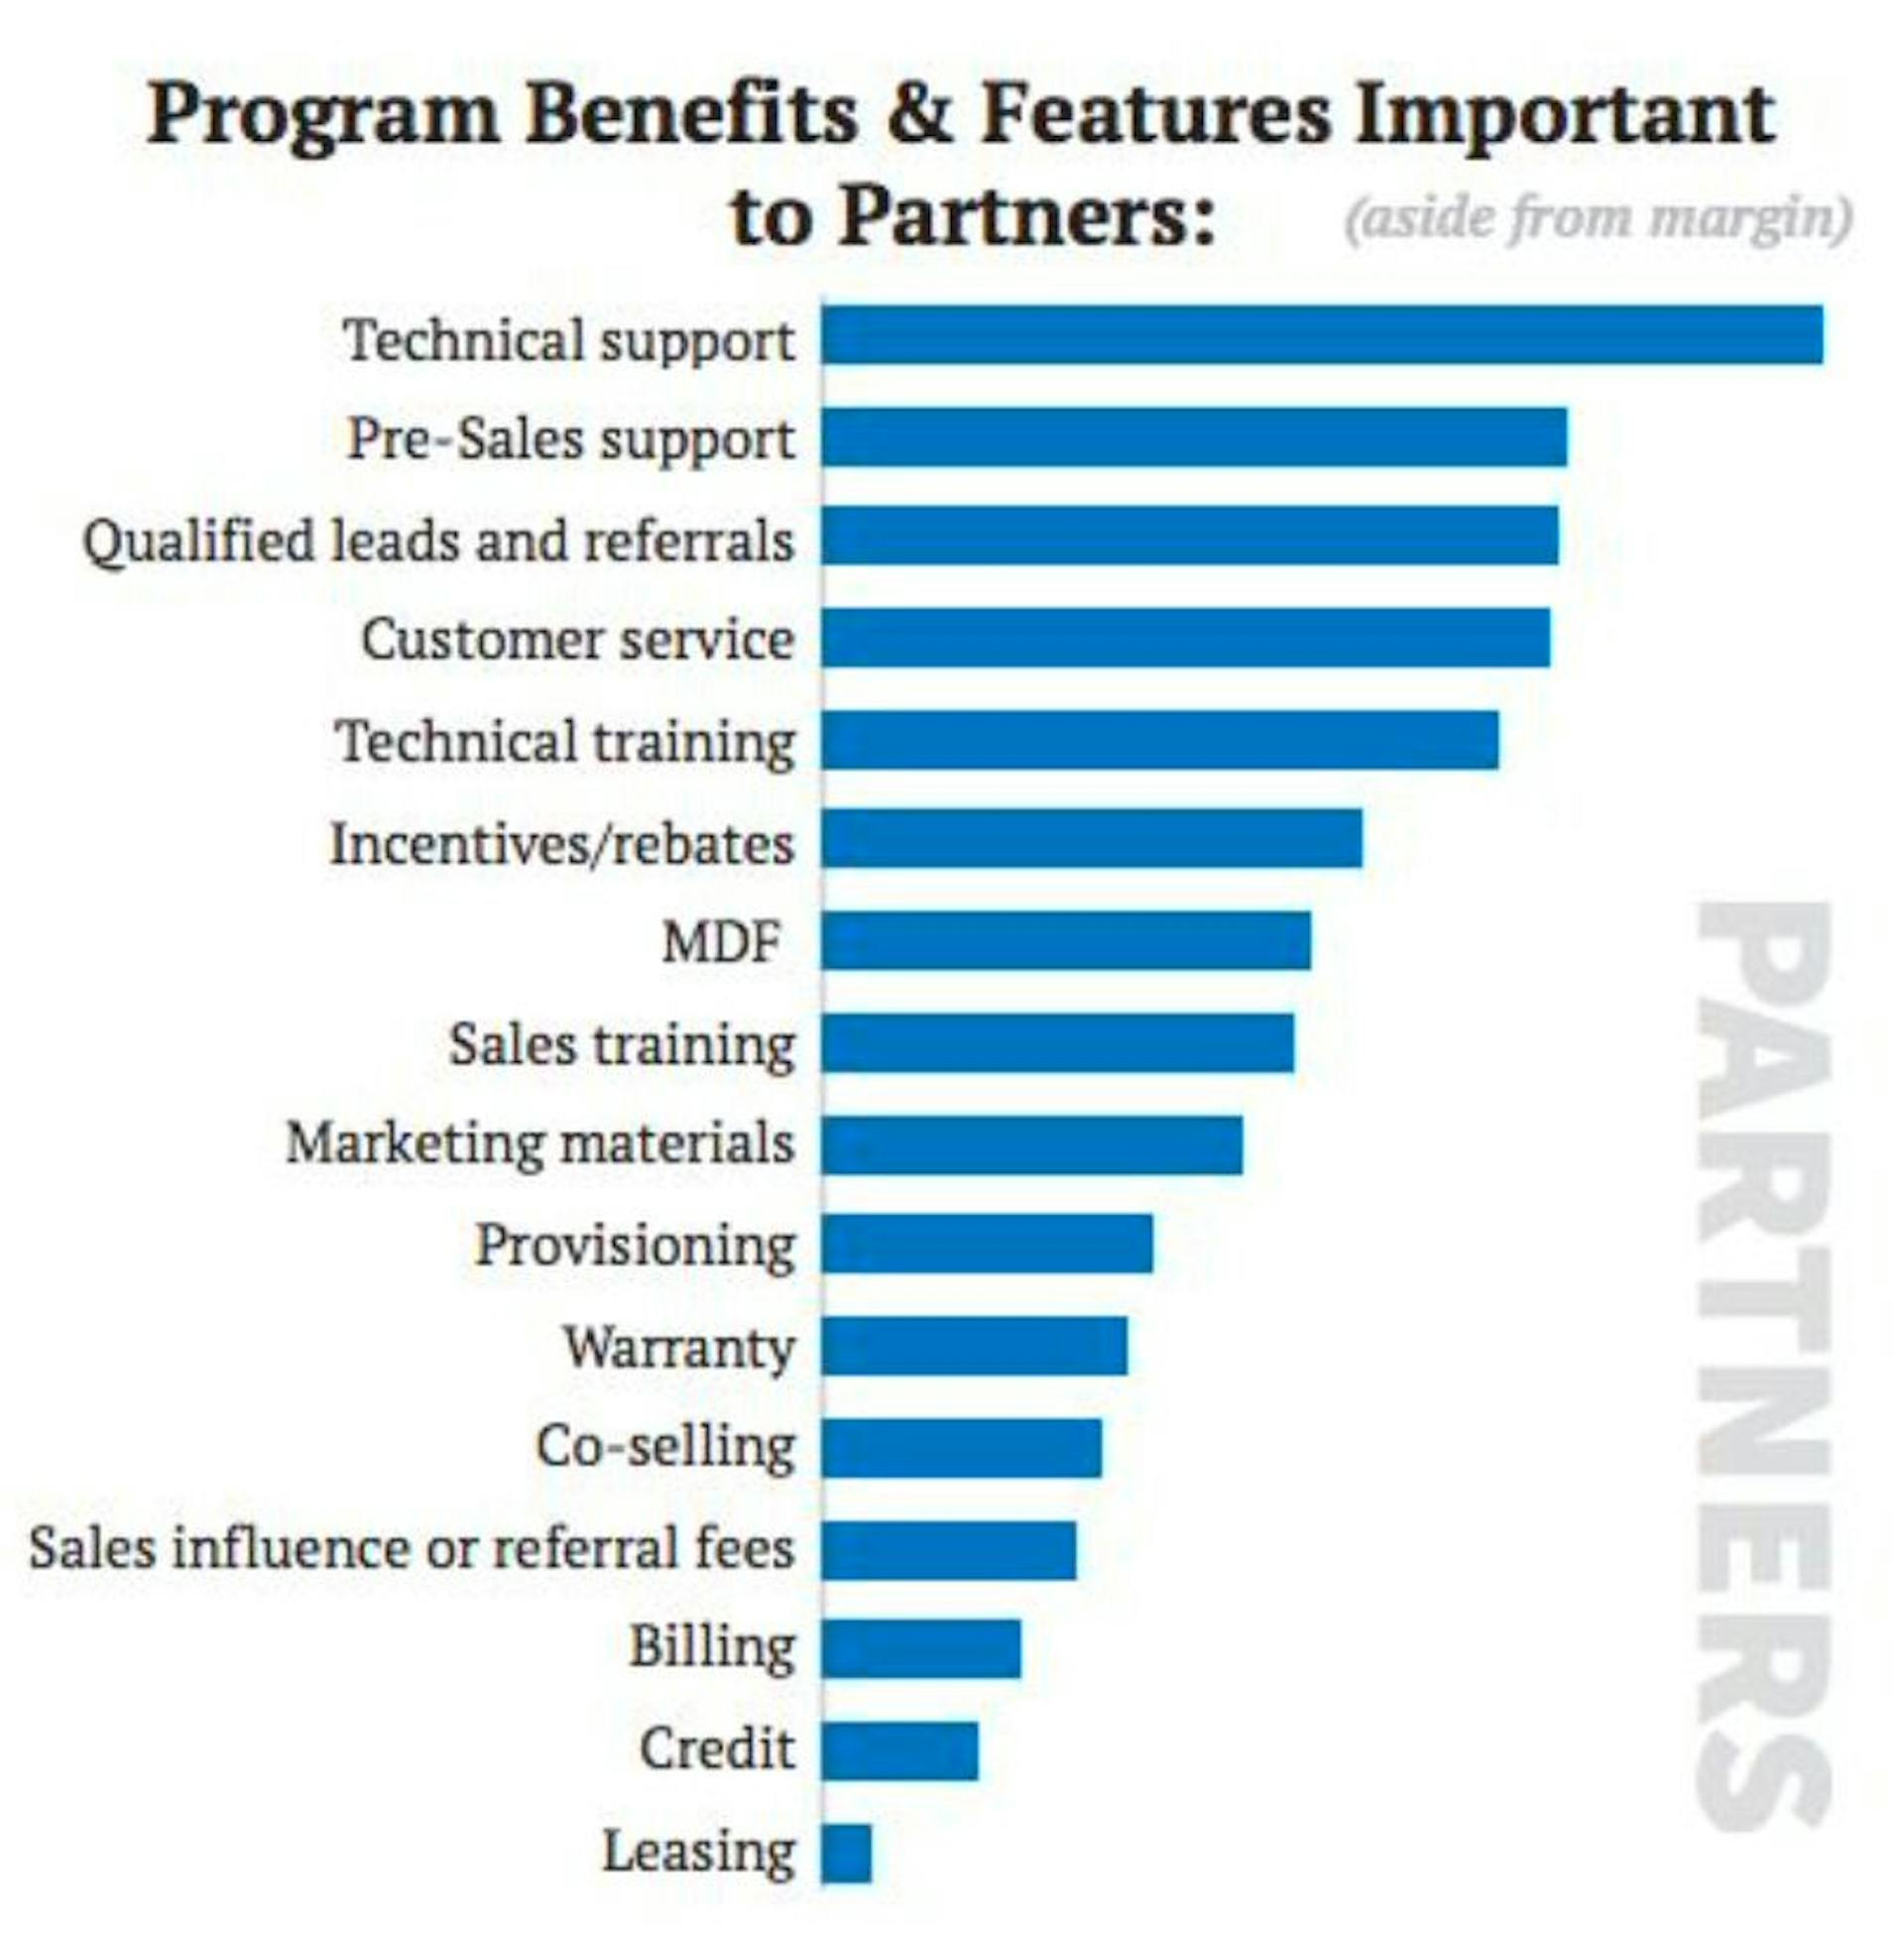 Source: 2016 State of Partnering Study by Partnerpath